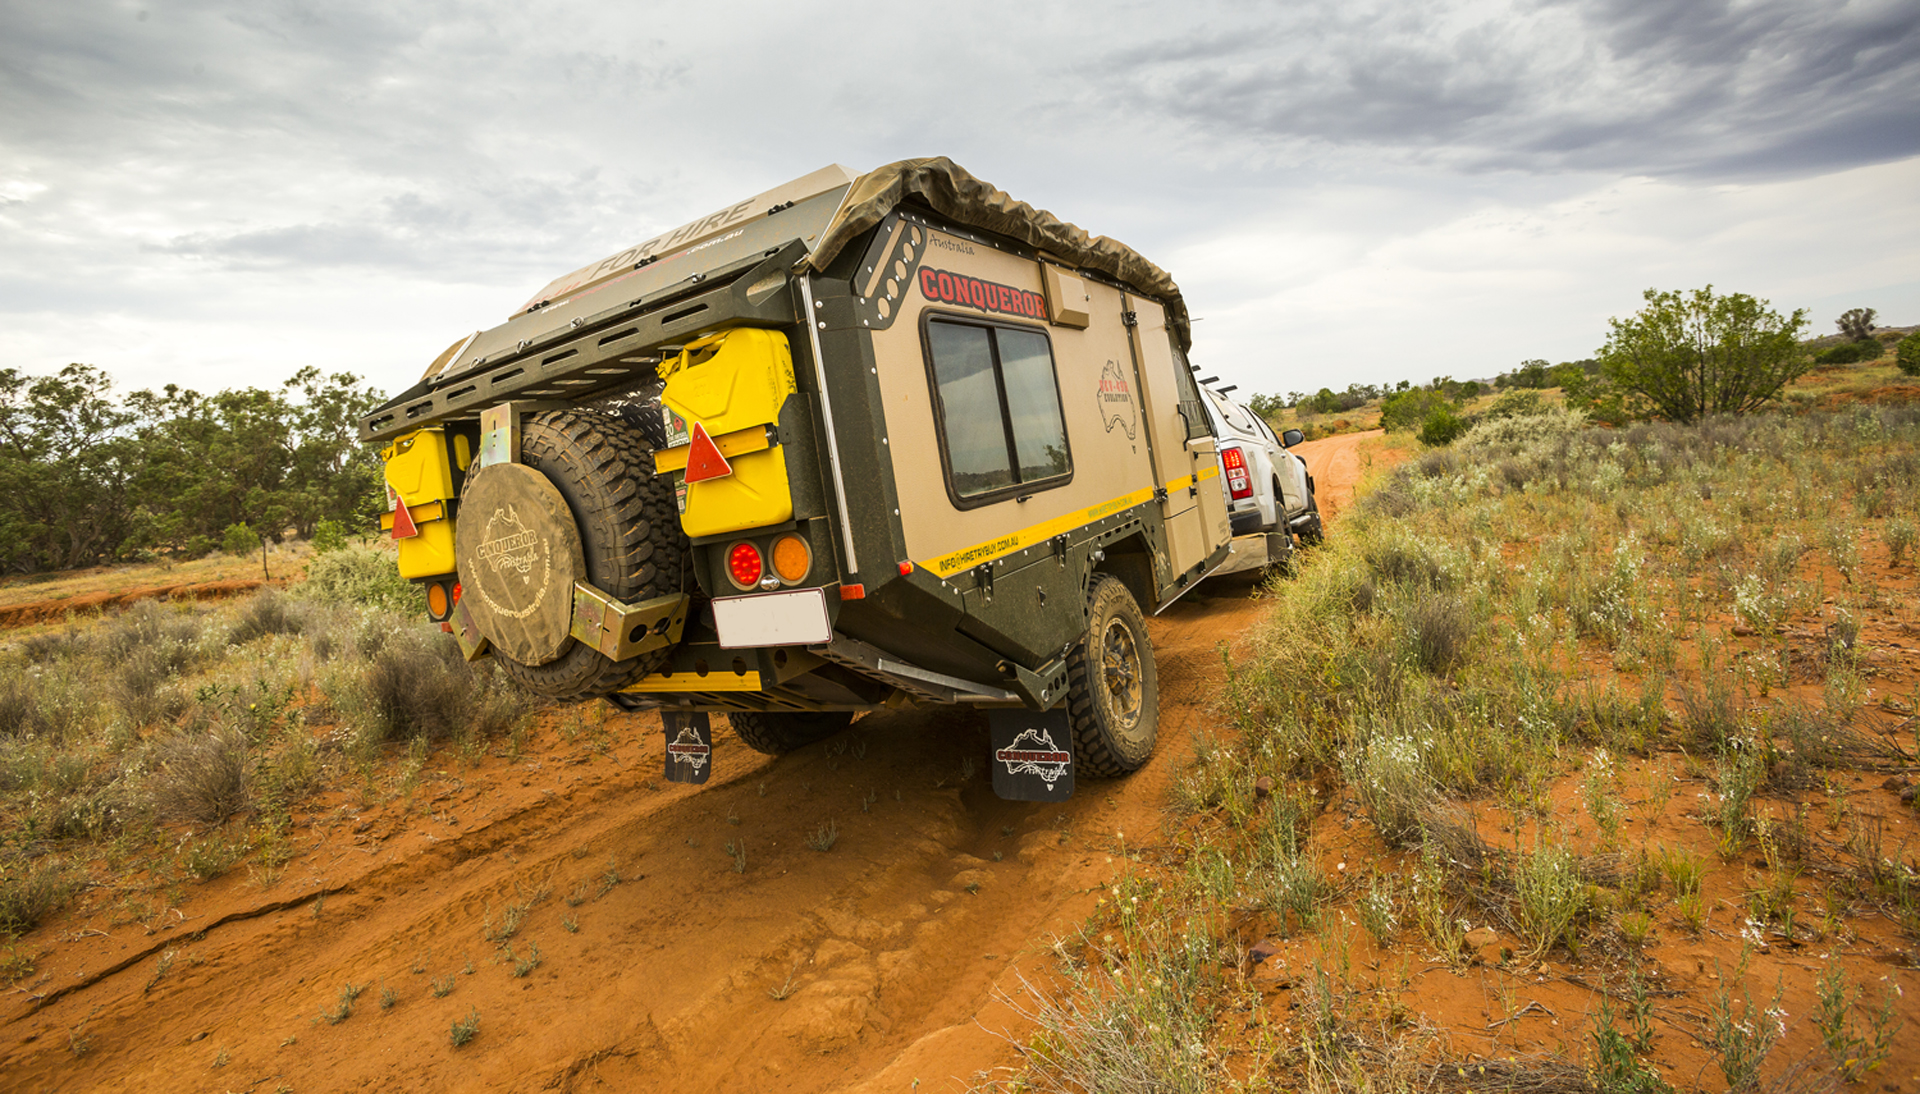 Commander S Rugged Off Road Vehicle